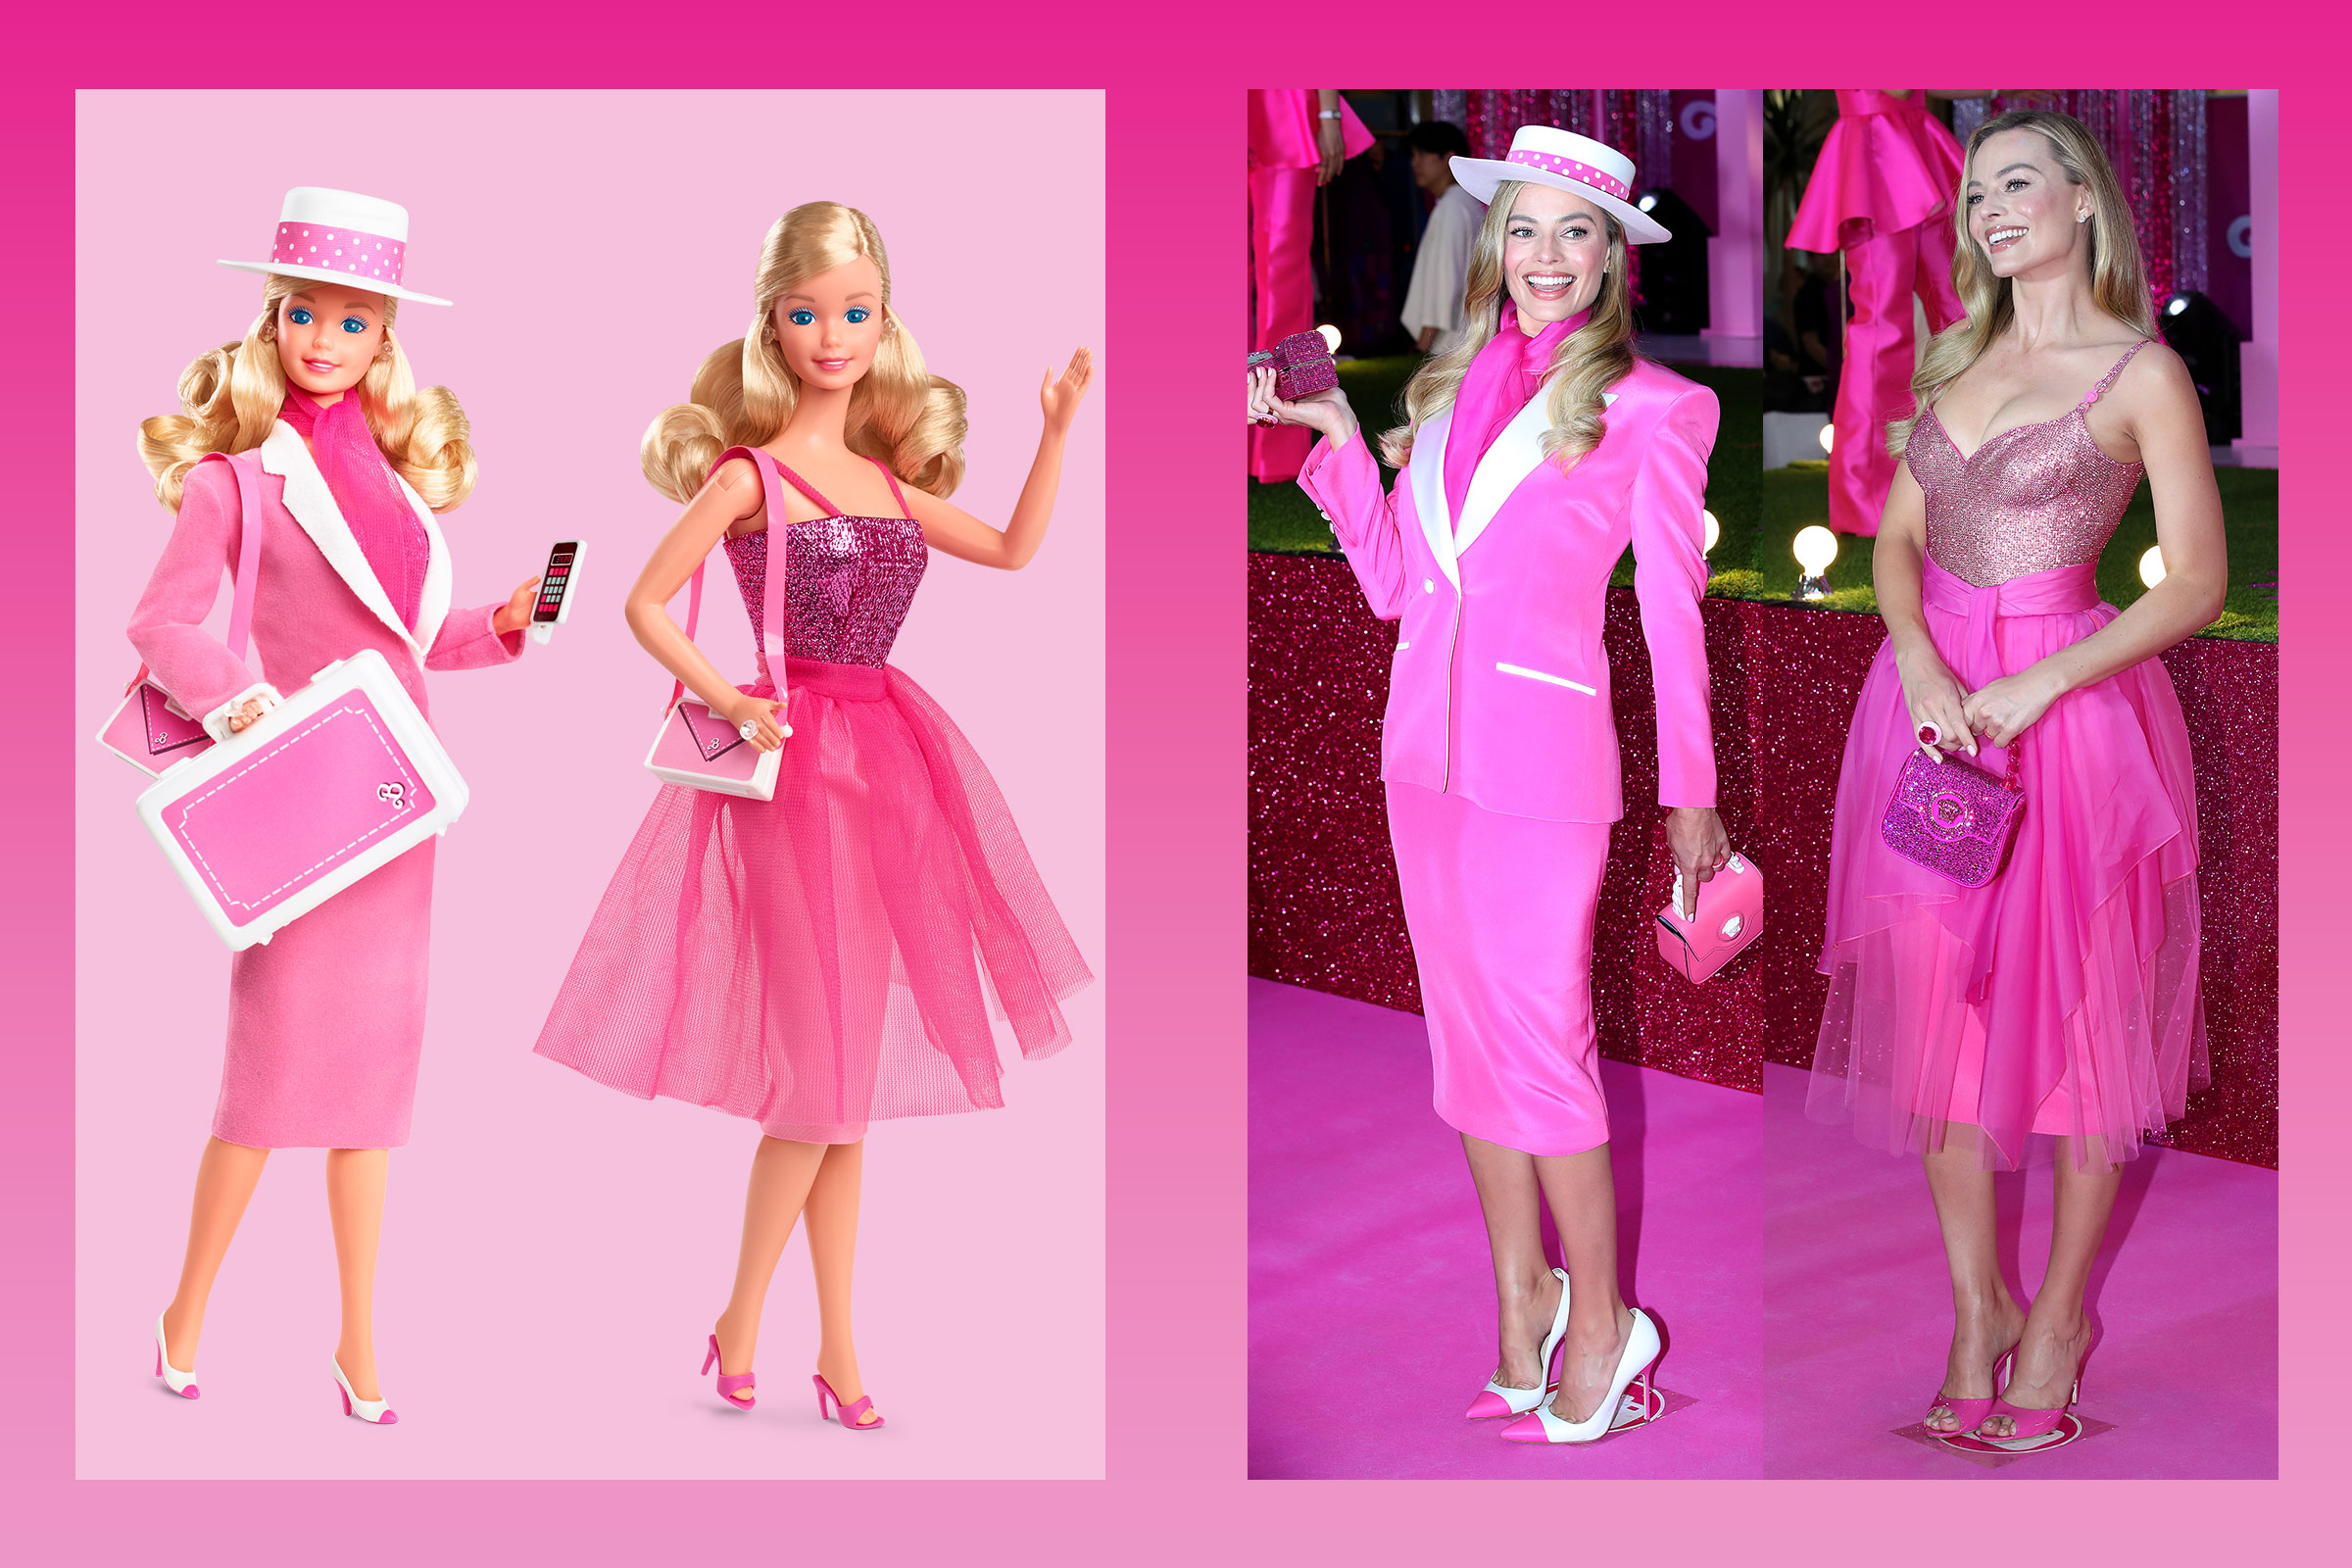 "Day to Night" Barbie (Mattel Inc. (2); Getty Images (2))